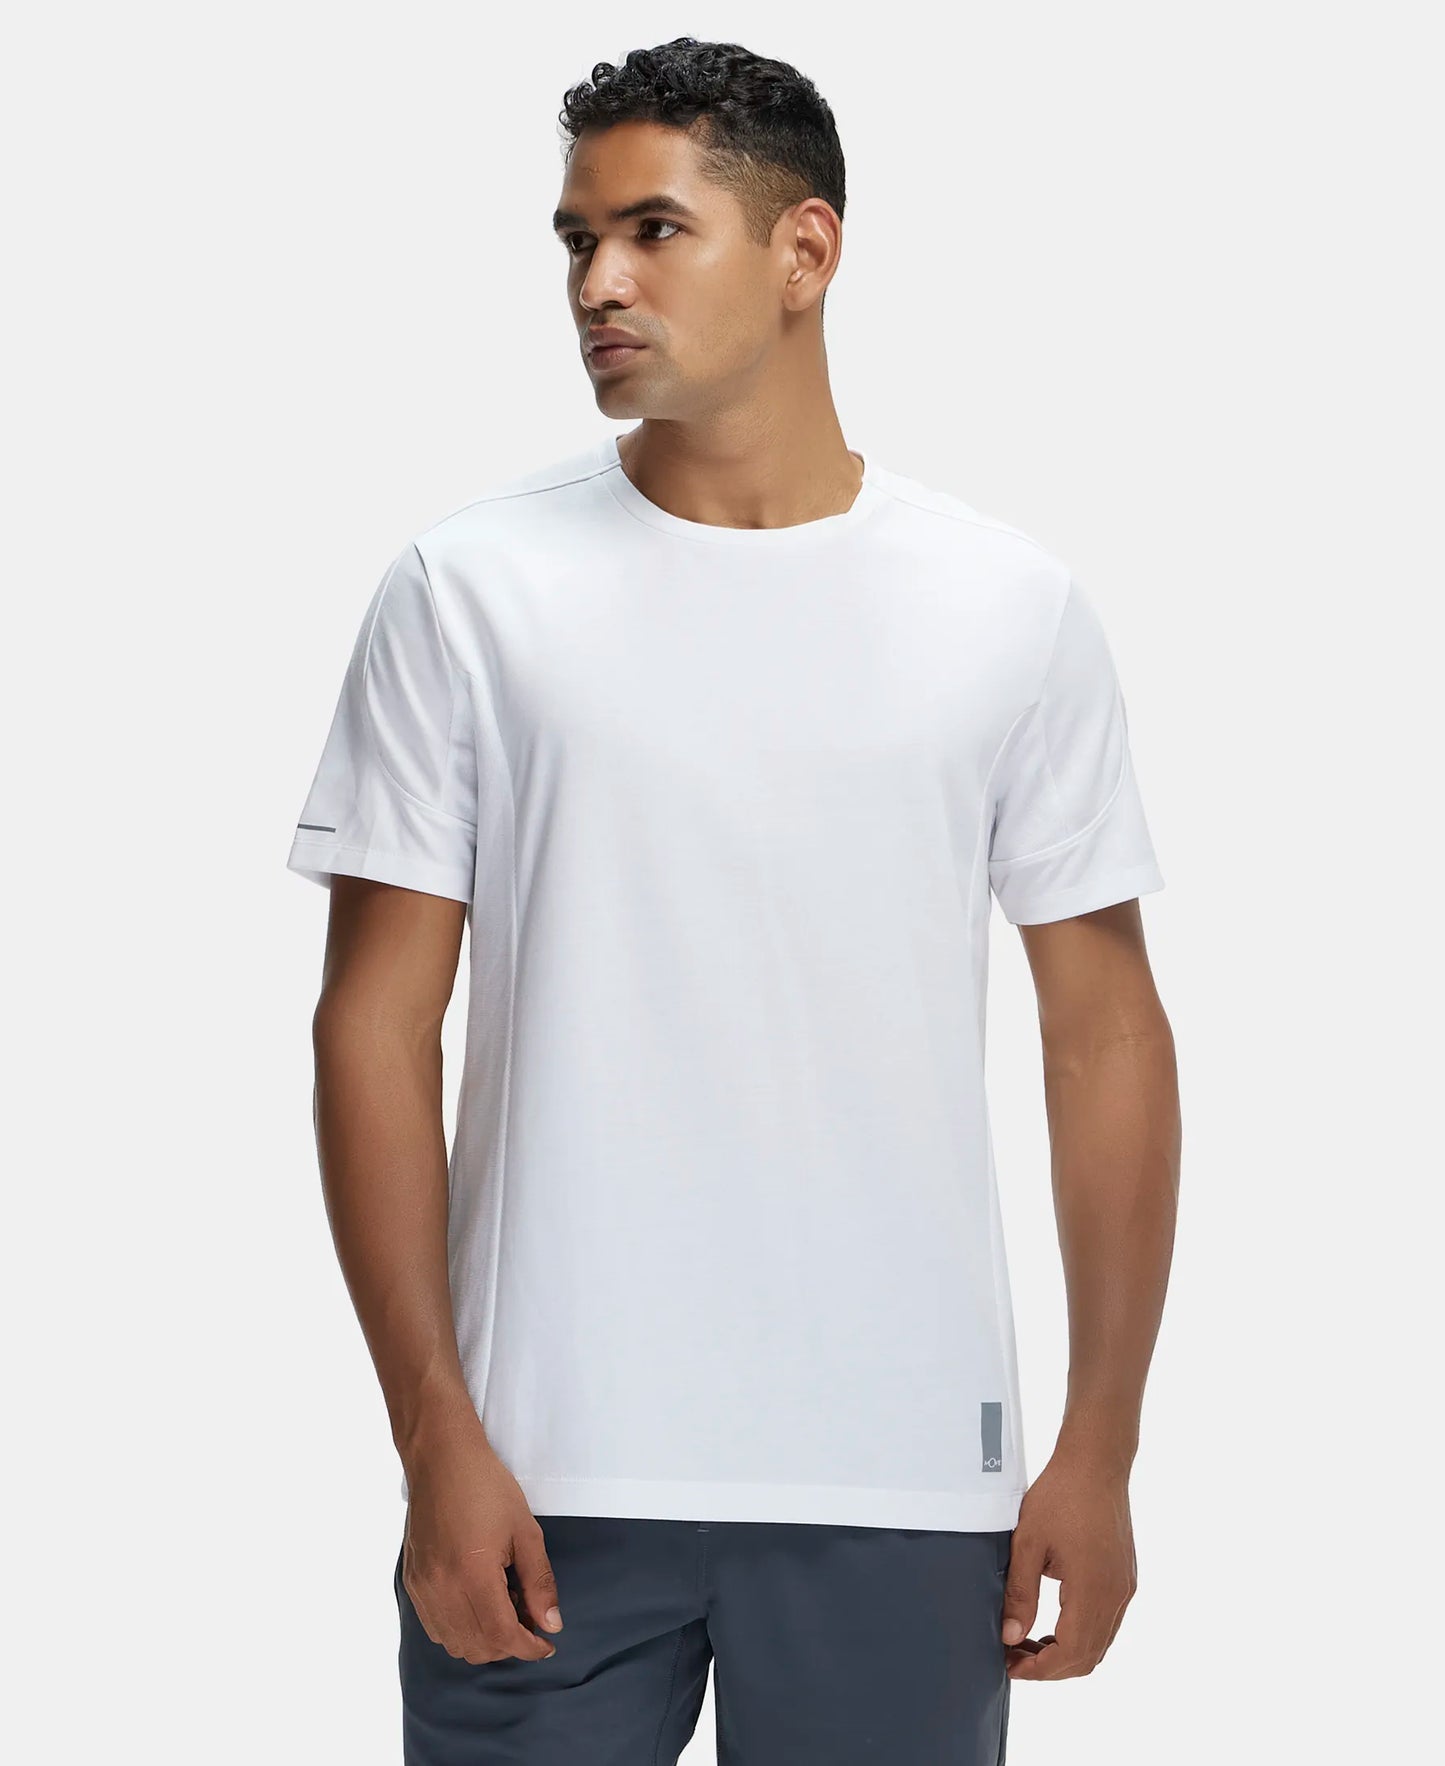 Super Combed Cotton Blend Solid Round Neck Half Sleeve T-Shirt with Breathable Mesh - White-1